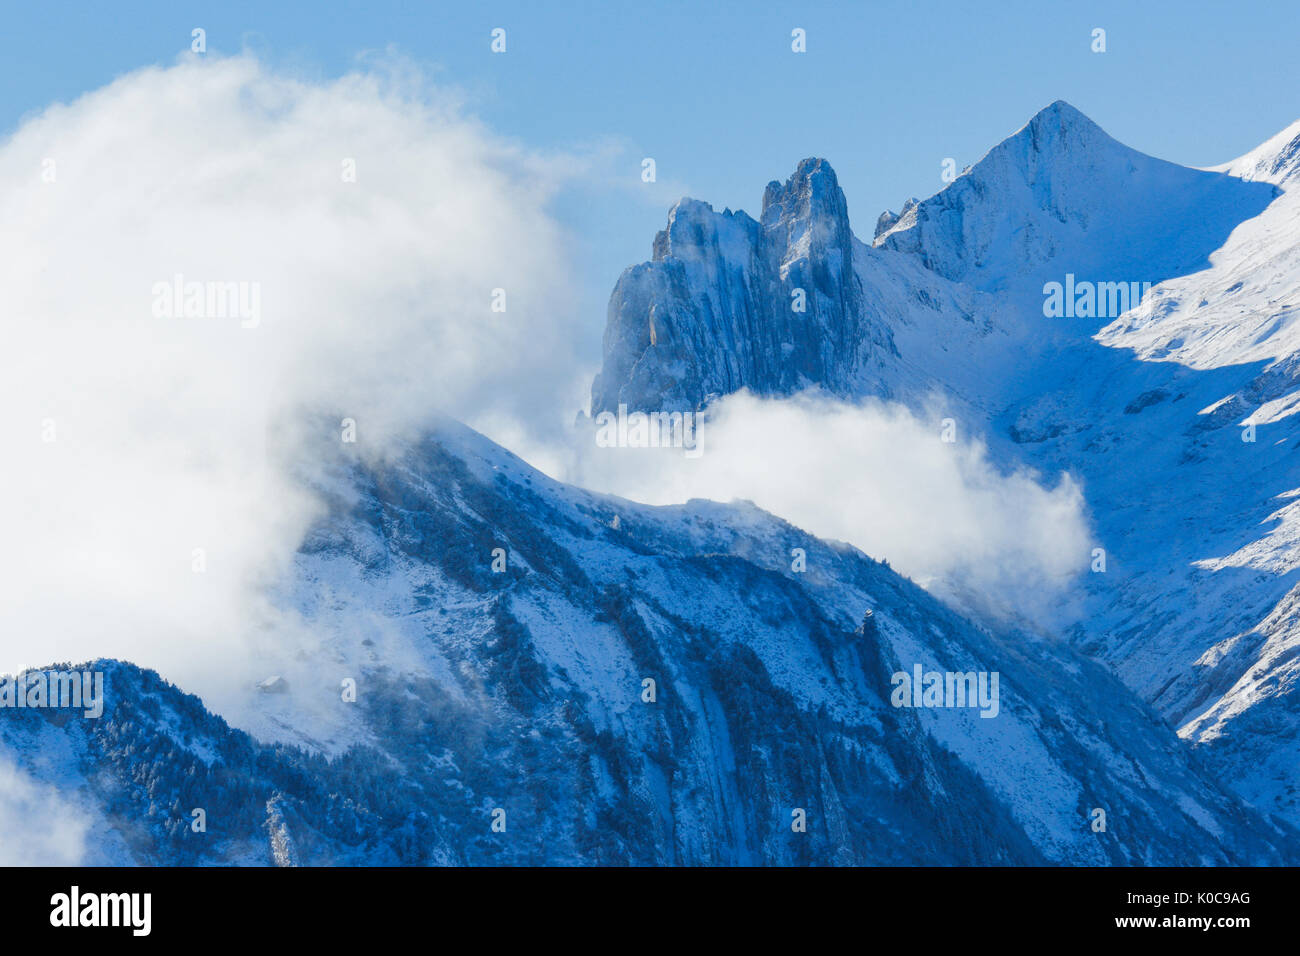 Alpsteingebiet High Resolution Stock Photography and Images - Alamy